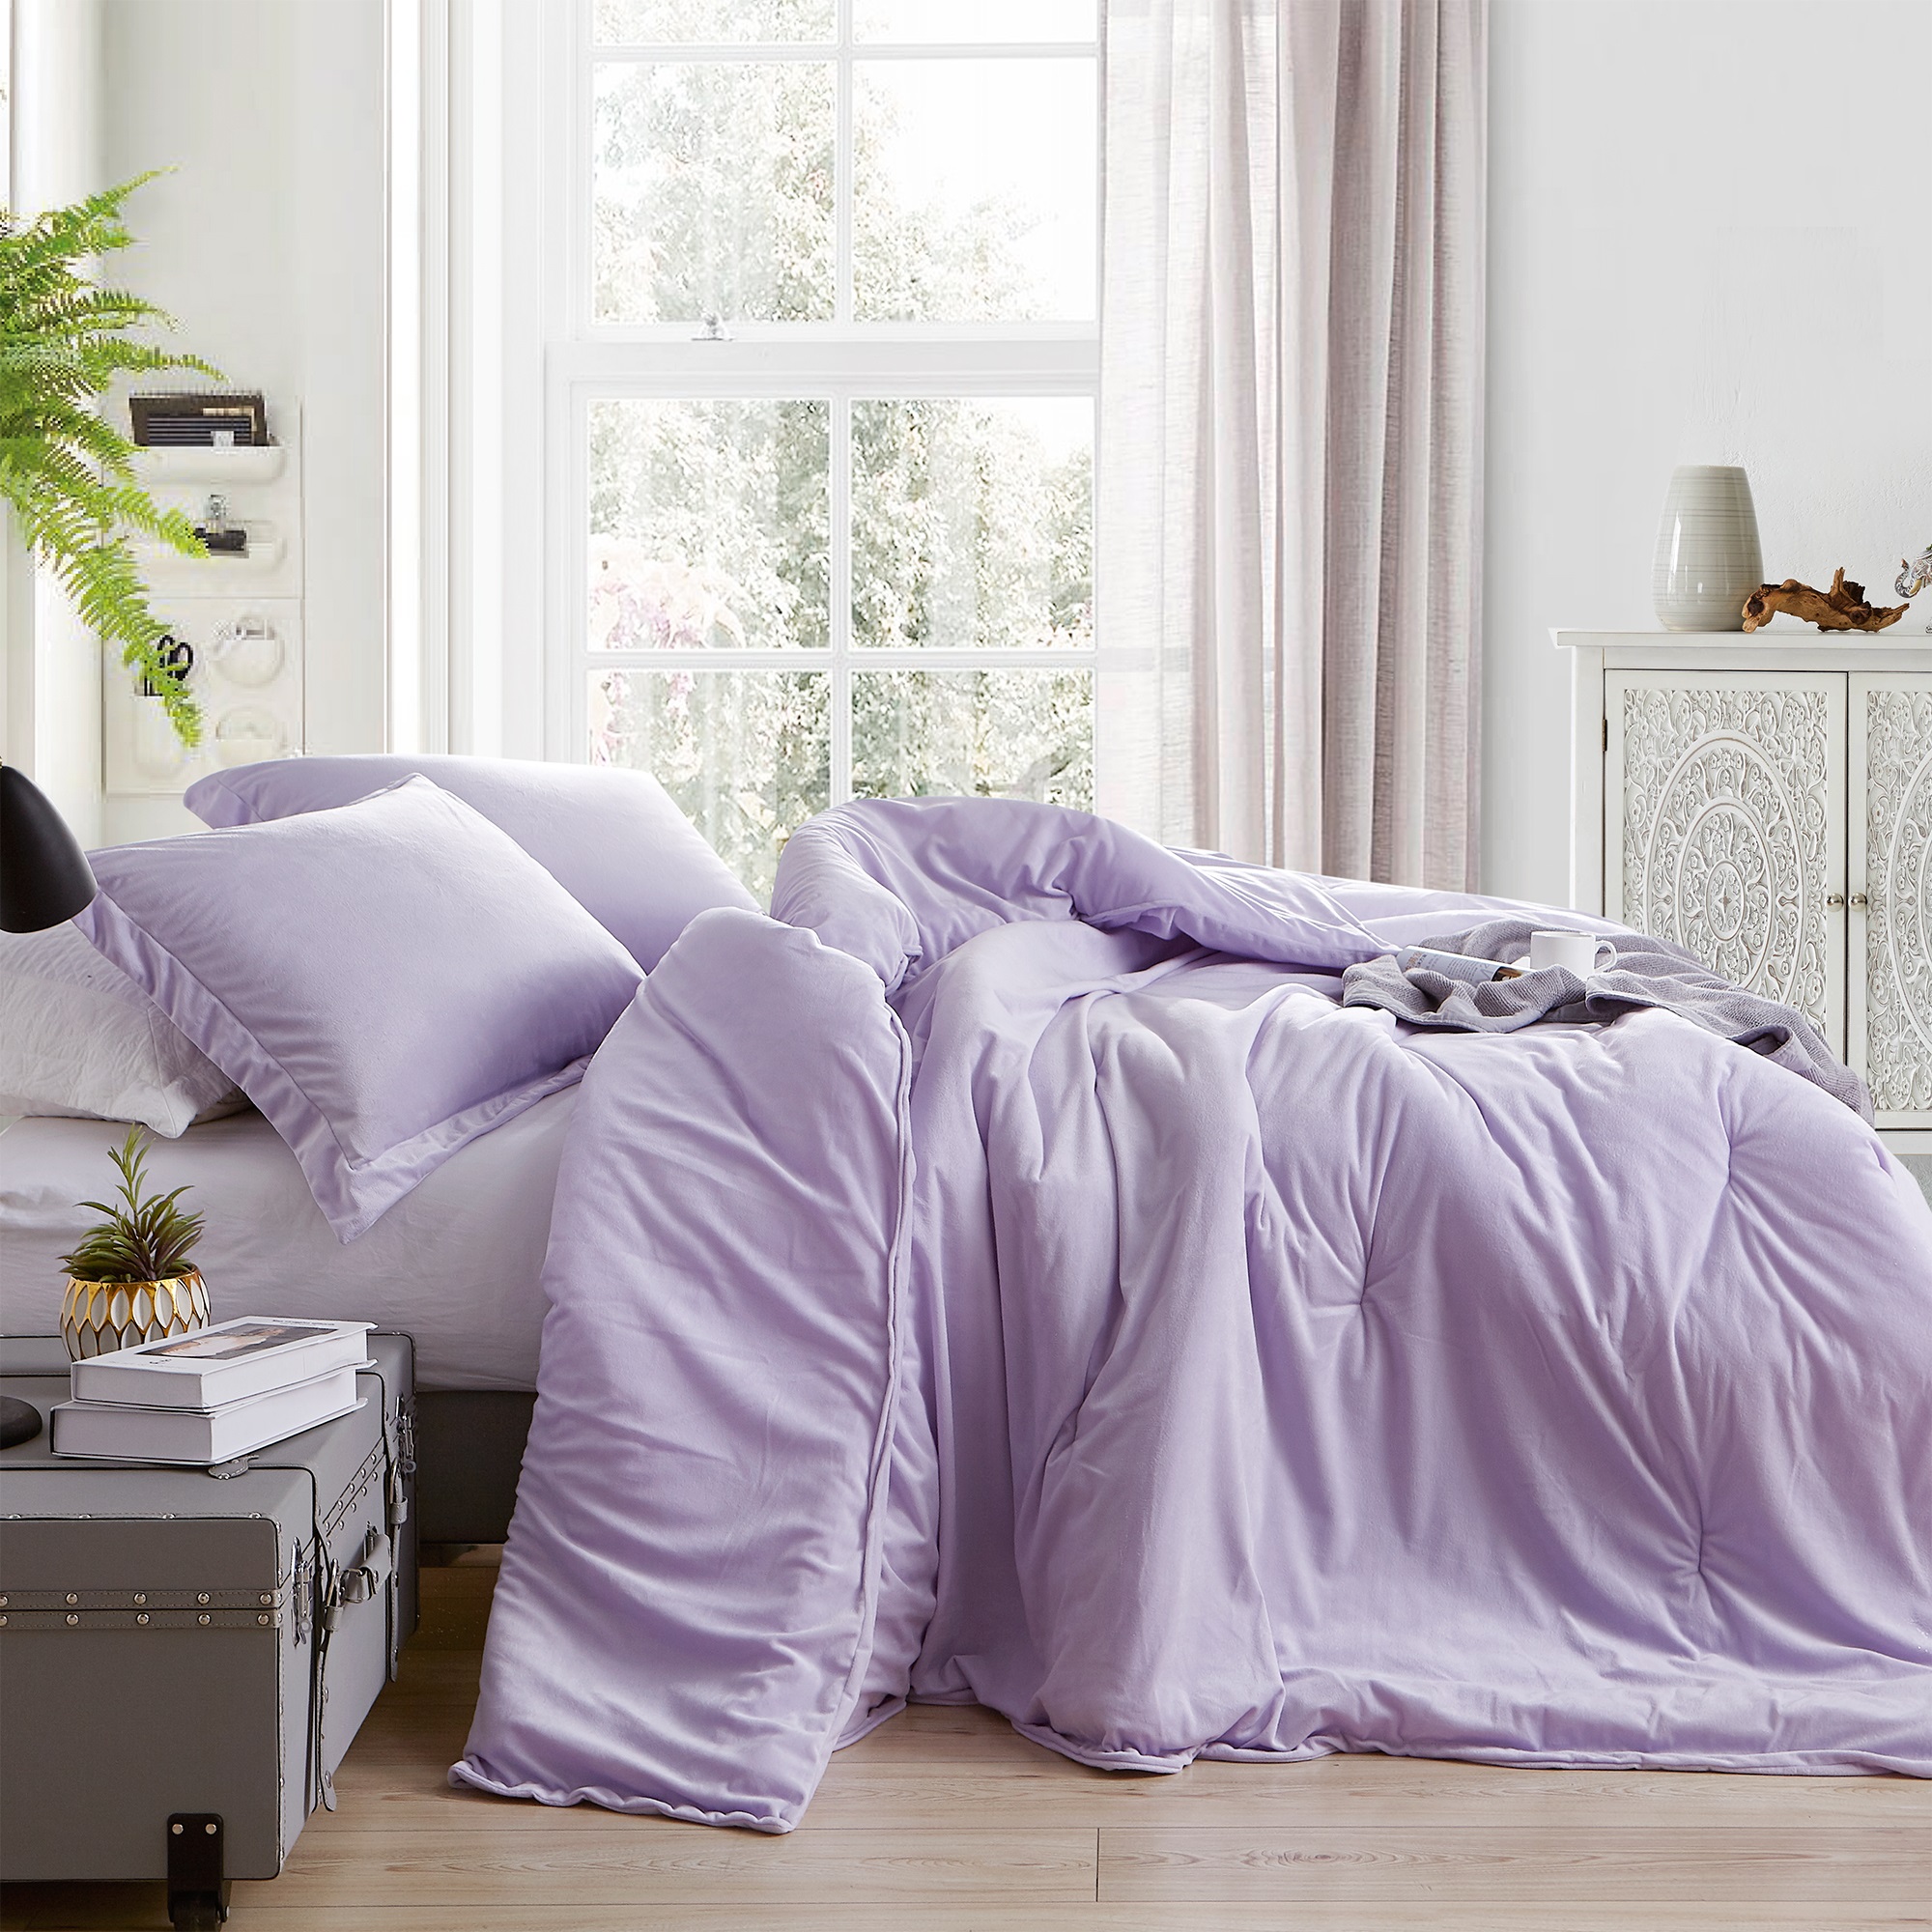 Coma Inducer Oversized Comforter - Baby Bird - Orchid Petal